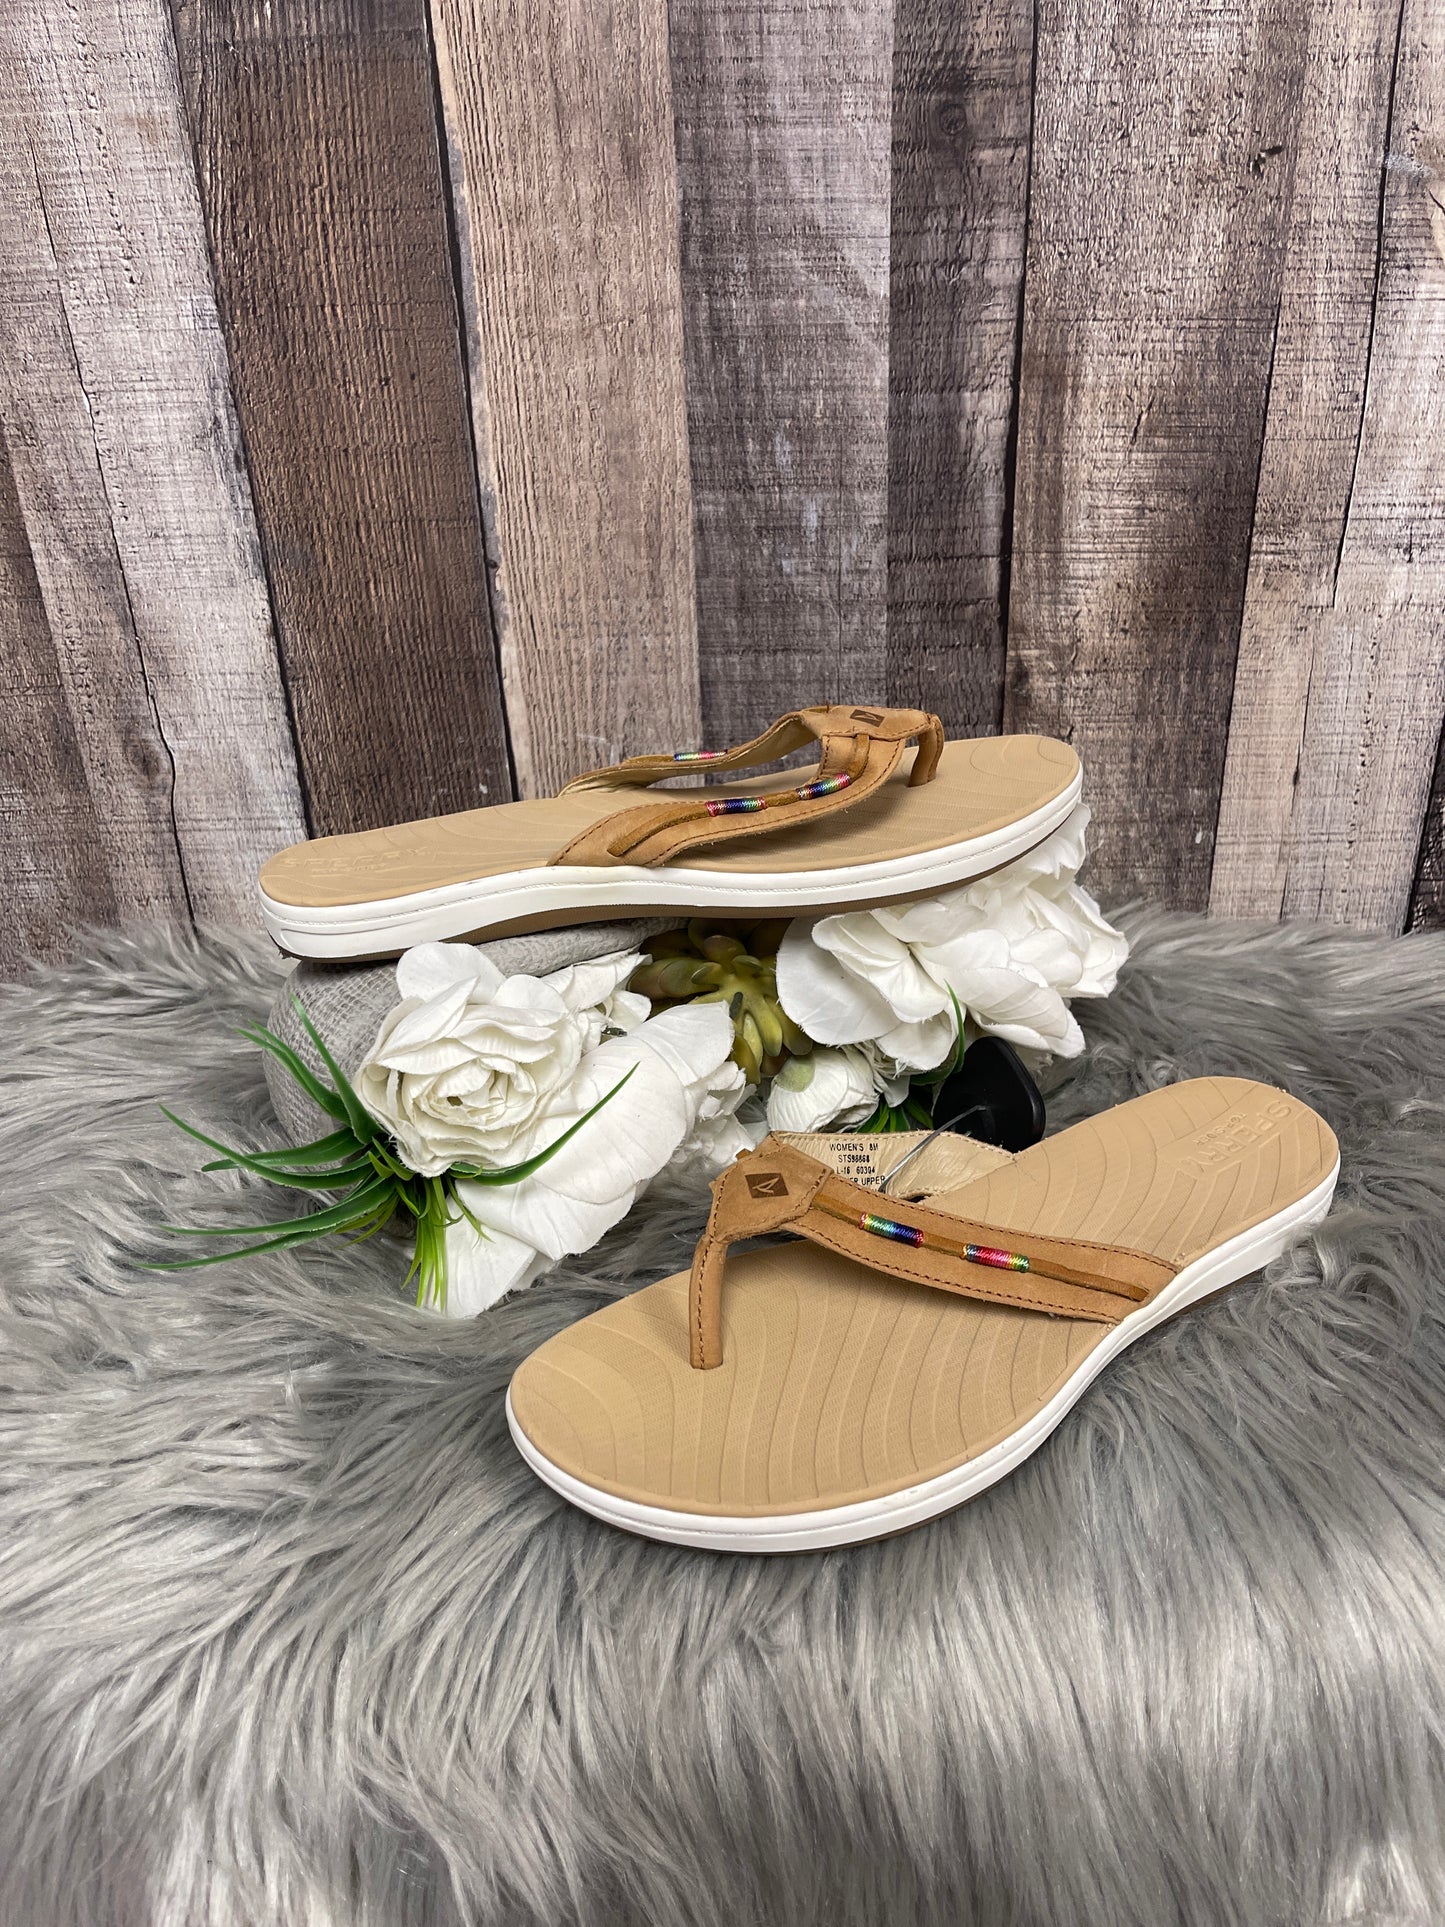 Sandals Flats By Sperry  Size: 8